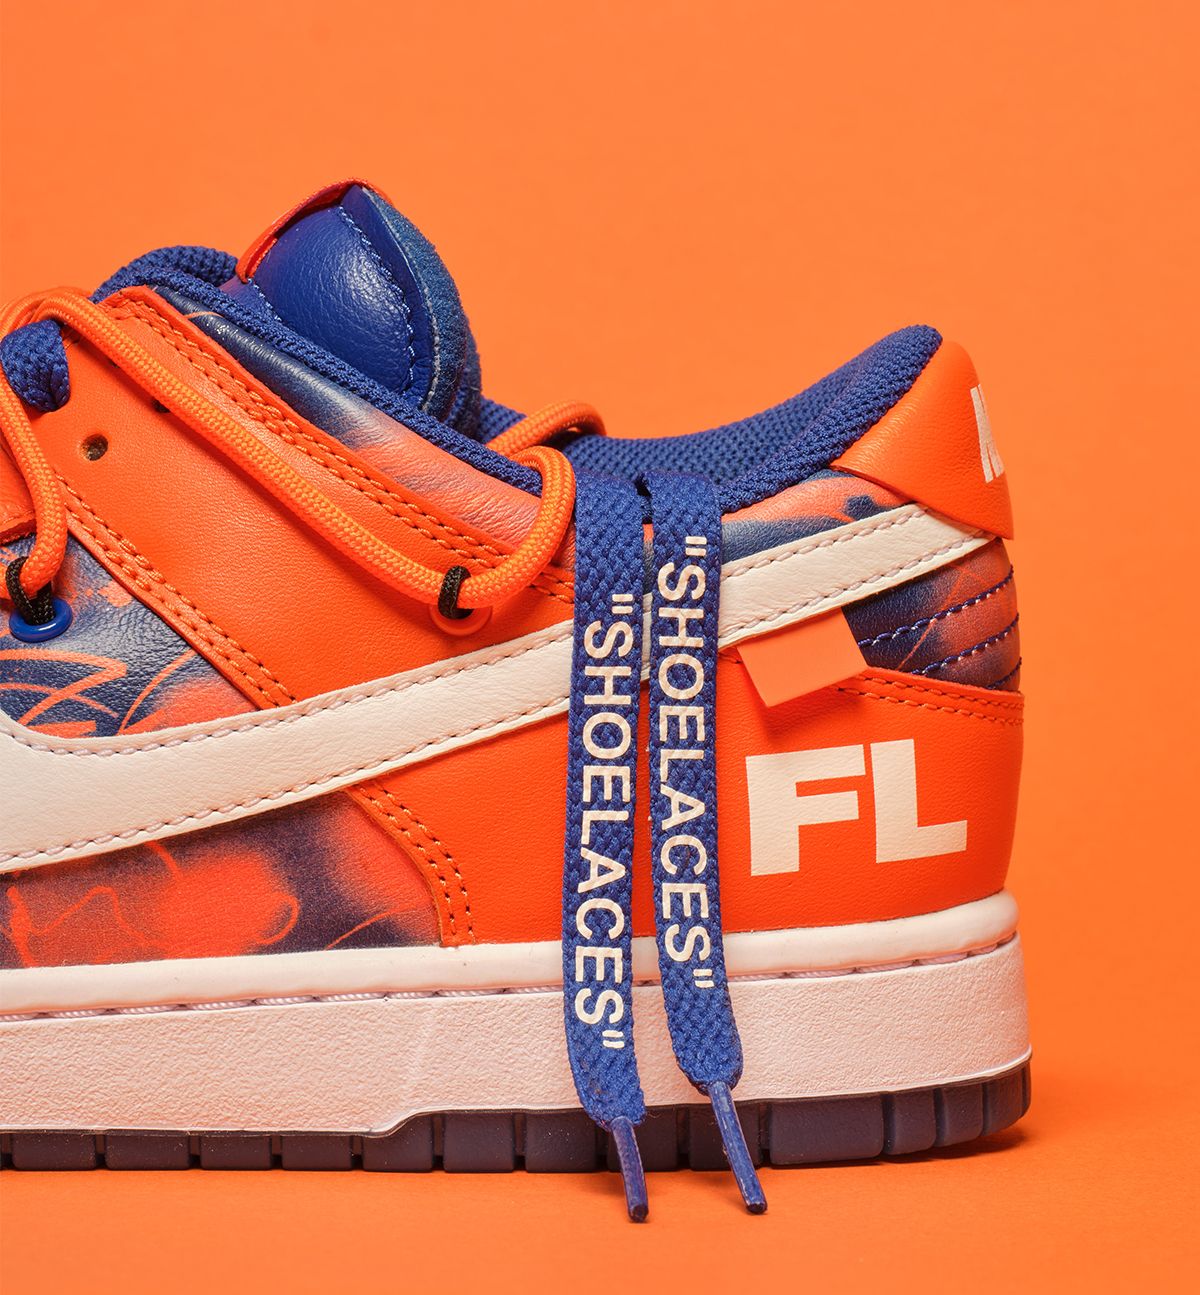 Sneakerheads Smashed Expectations at an Auction of Designs by Virgil Abloh  and Futura, With a Single Pair Netting Over $100,000